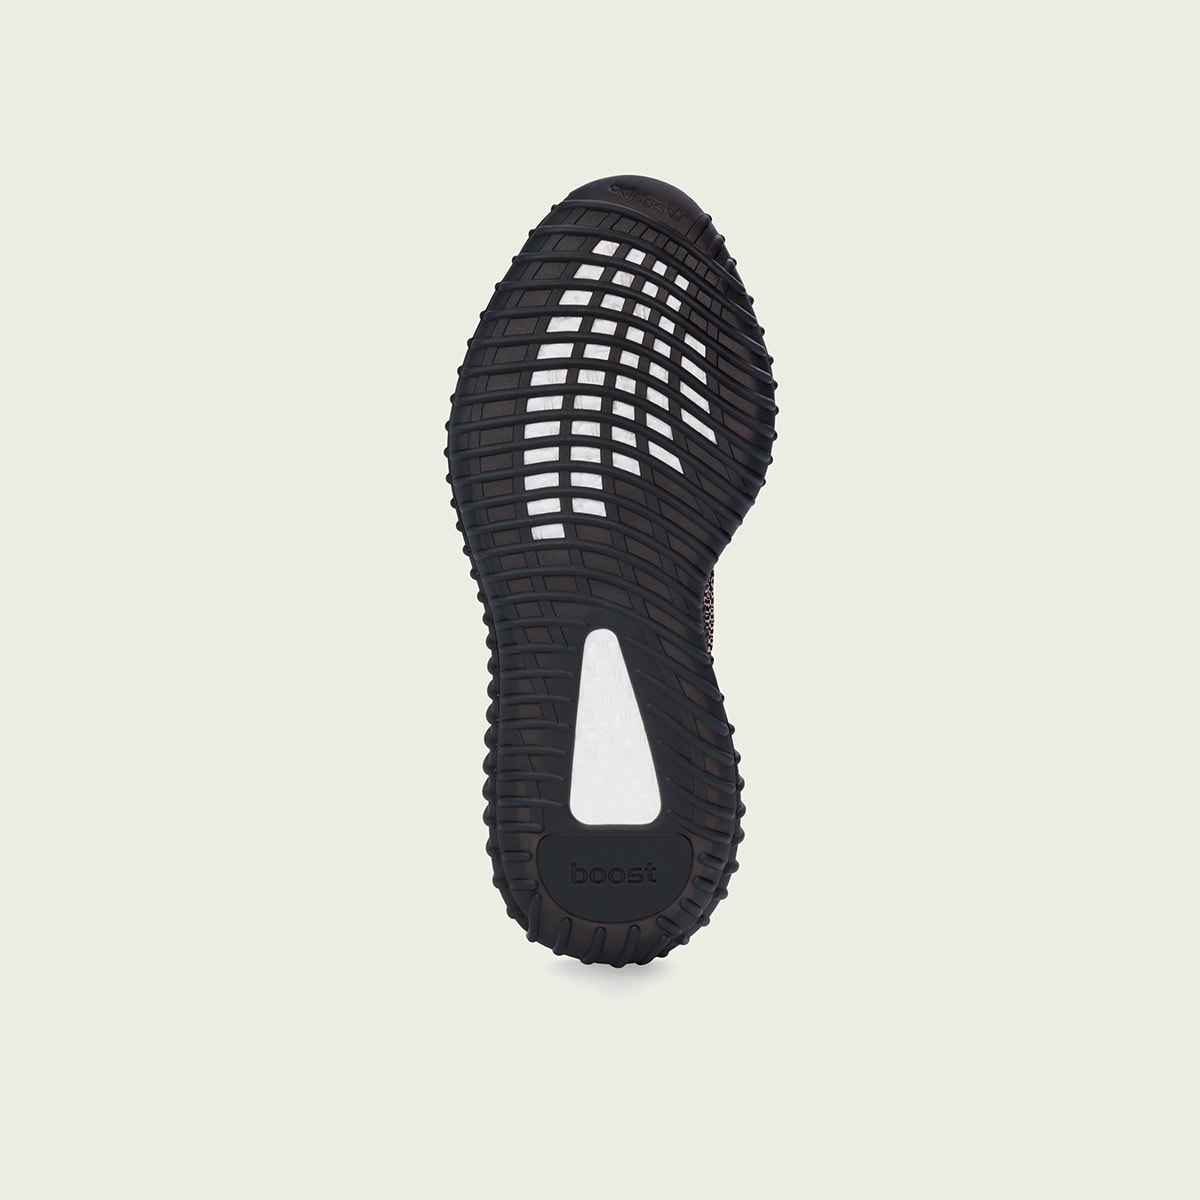 Yeezy Boost 350 V2 (Yecheil) | END. Launches